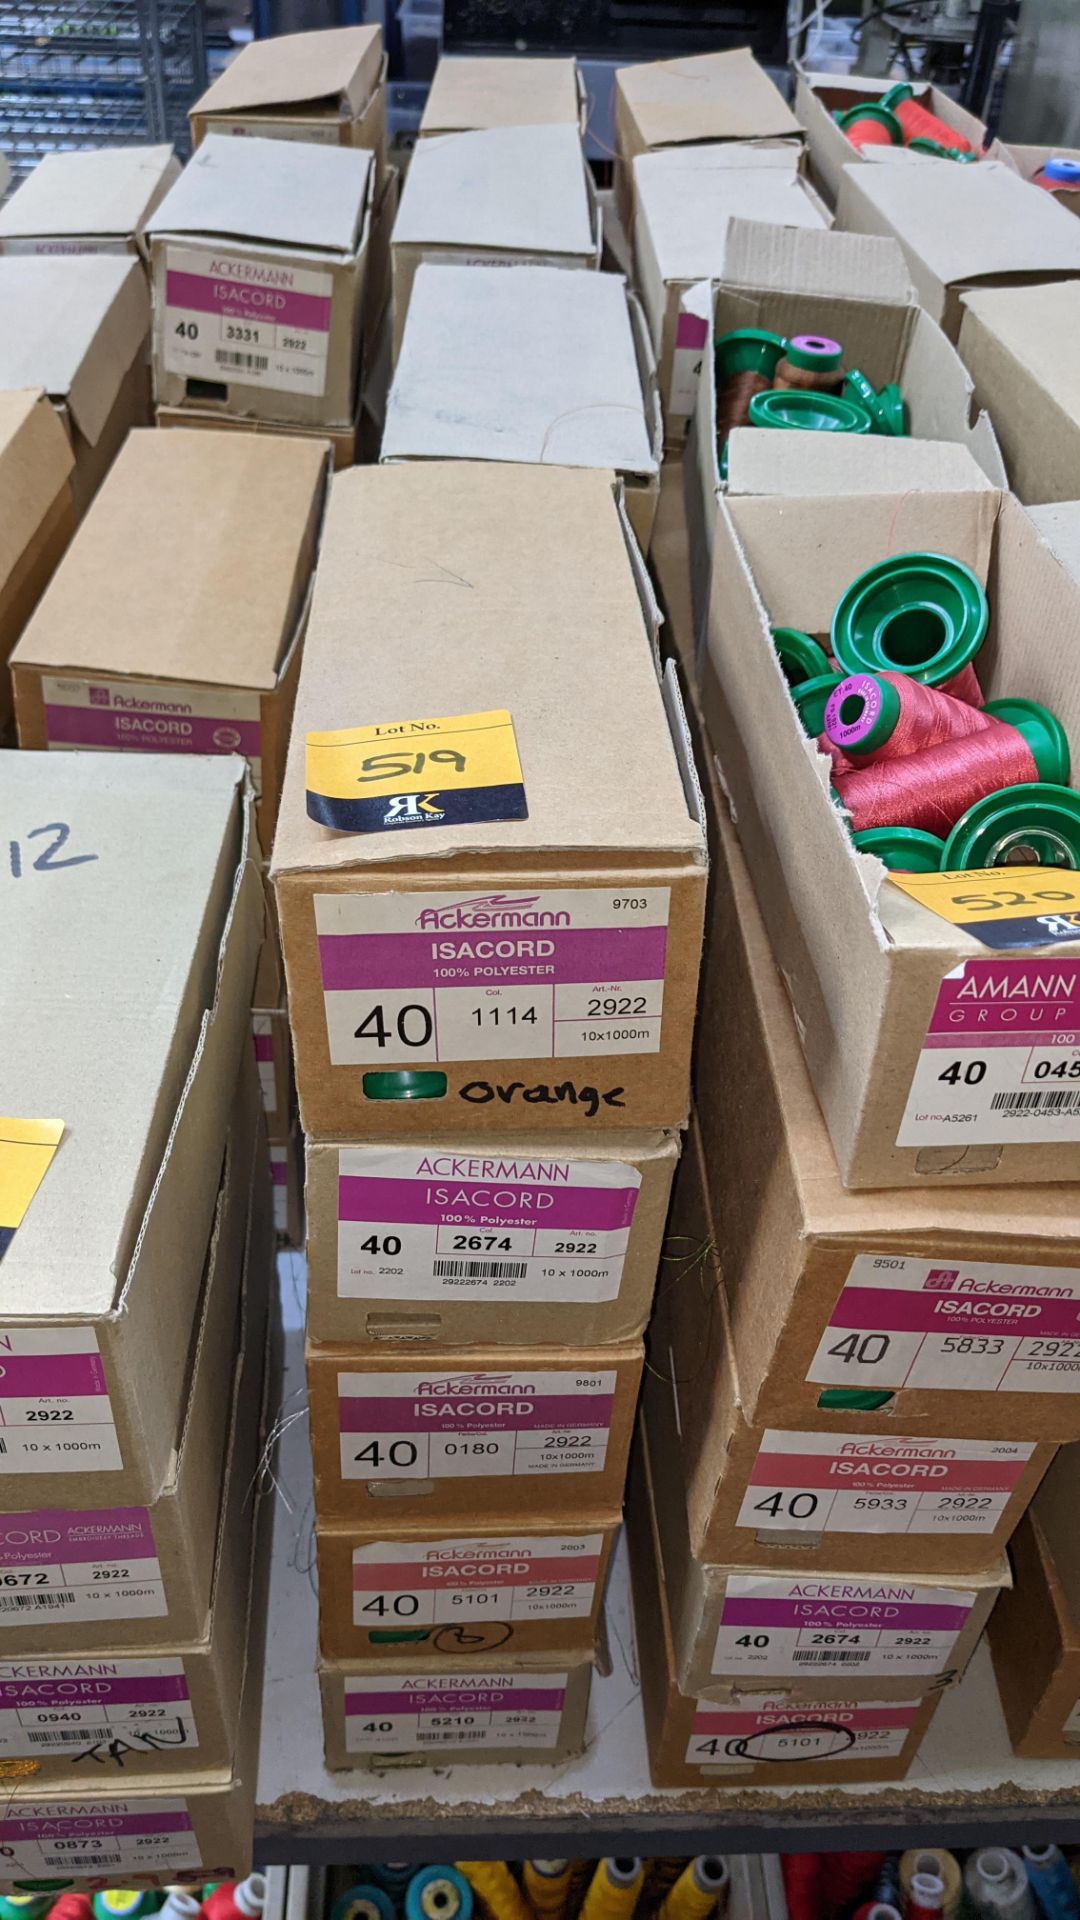 20 boxes of Ackermann Isacord (40) polyester thread